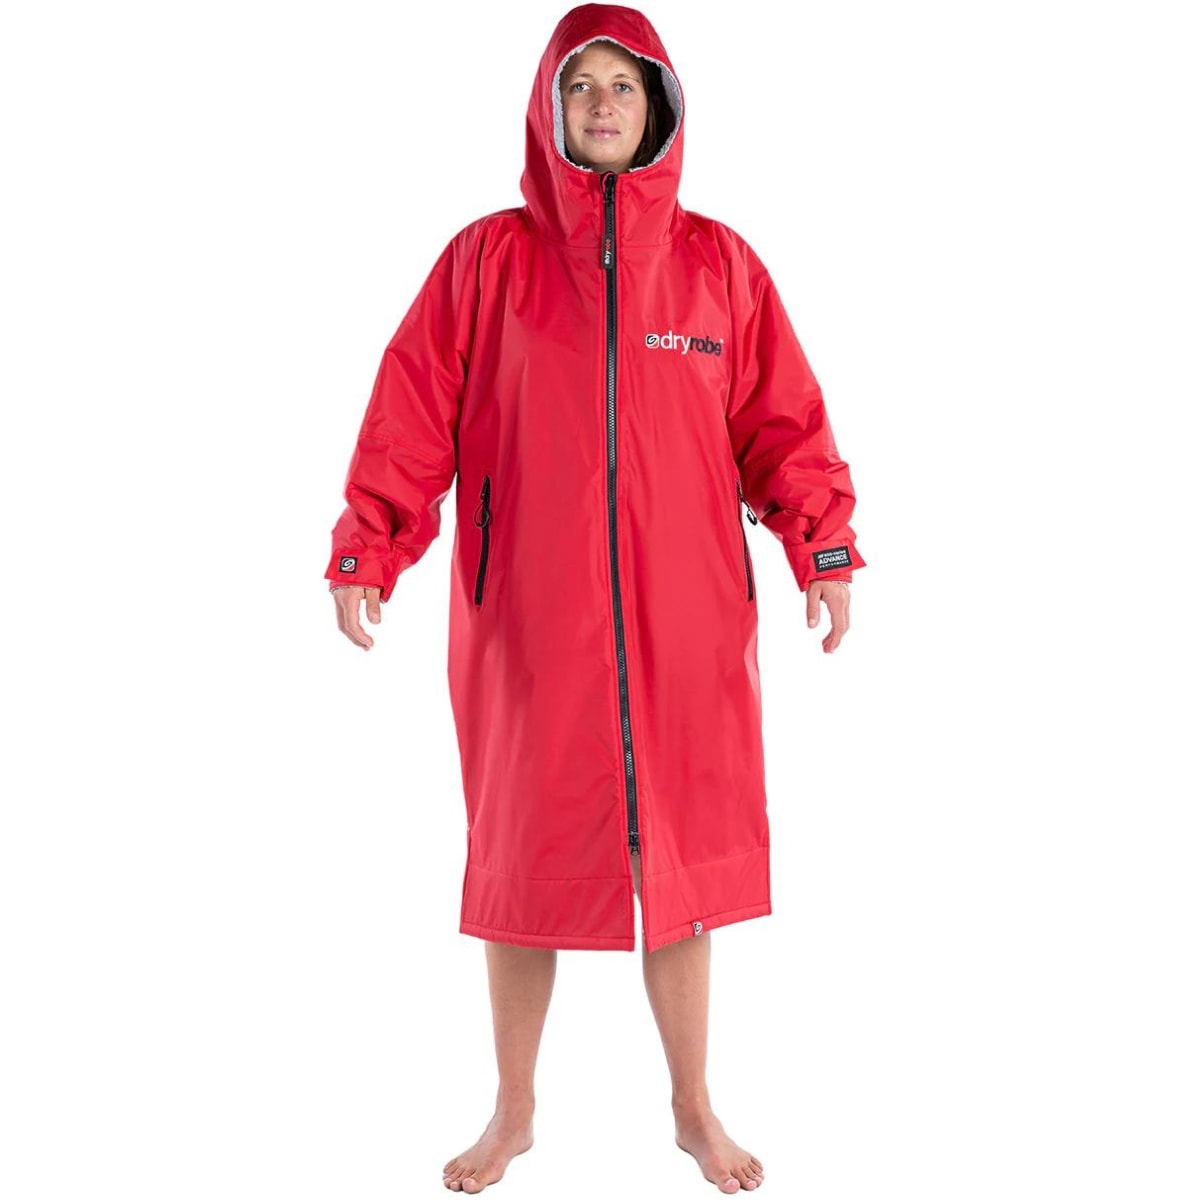 Dryrobe Advance Long Sleeve Drying &amp; Changing Robe - Red/Grey - Changing Robe Poncho Towel by Dryrobe